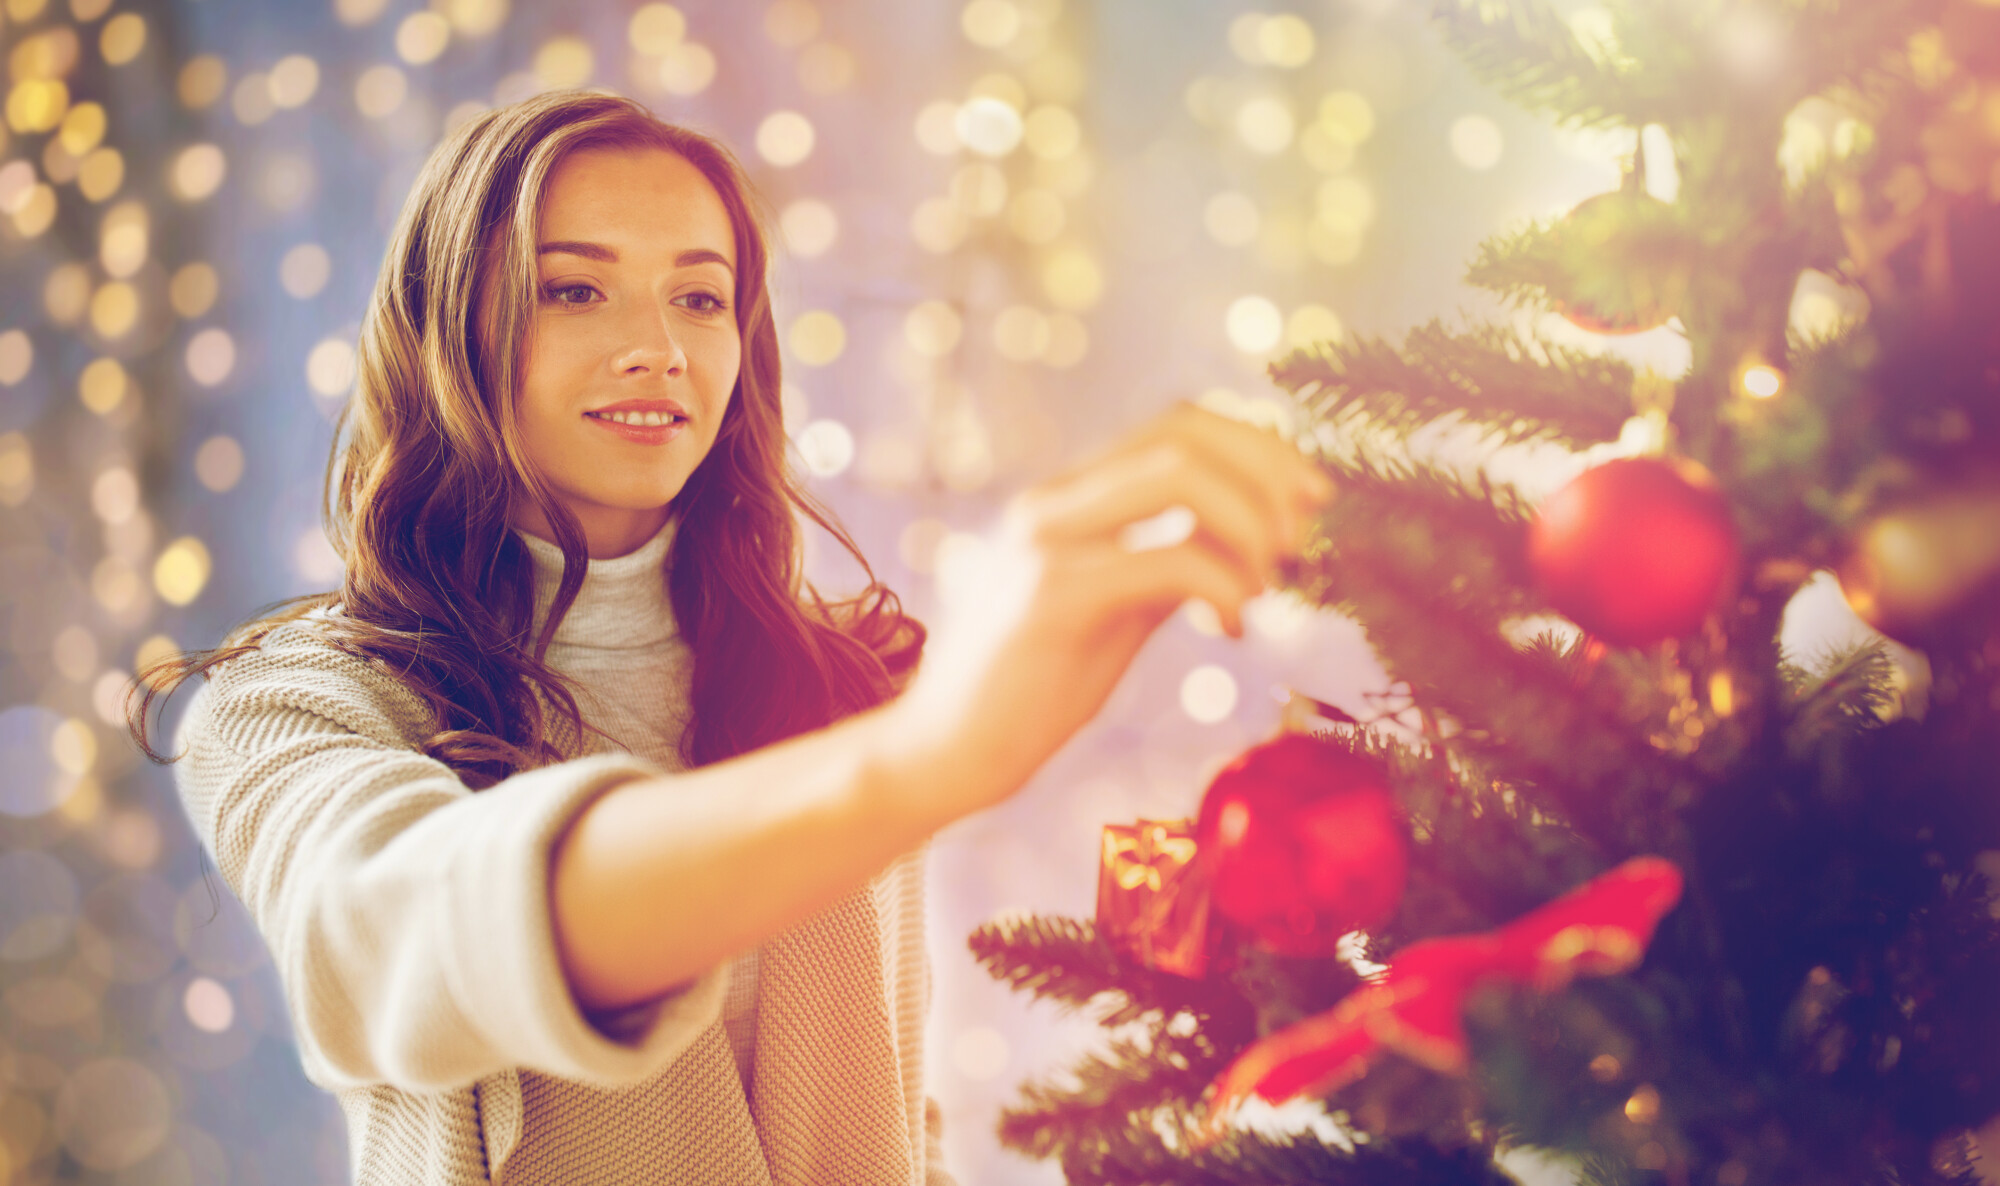 HOA Holiday Decorating in Jefferson, GA: 5 Guidelines for Residents